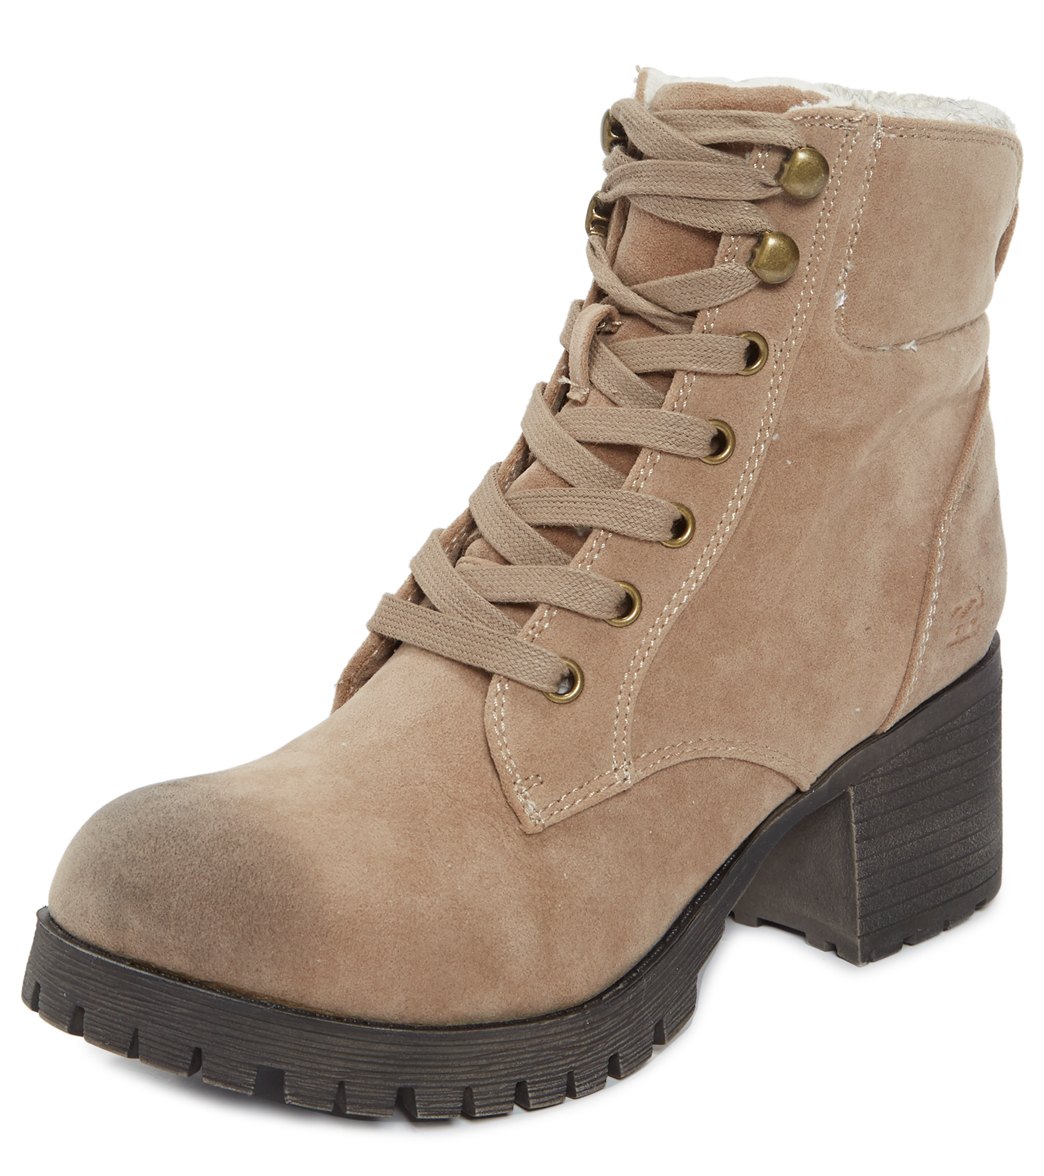 Billabong Wild Thing Sherpa Lined Bootie - Dune 10 - Swimoutlet.com